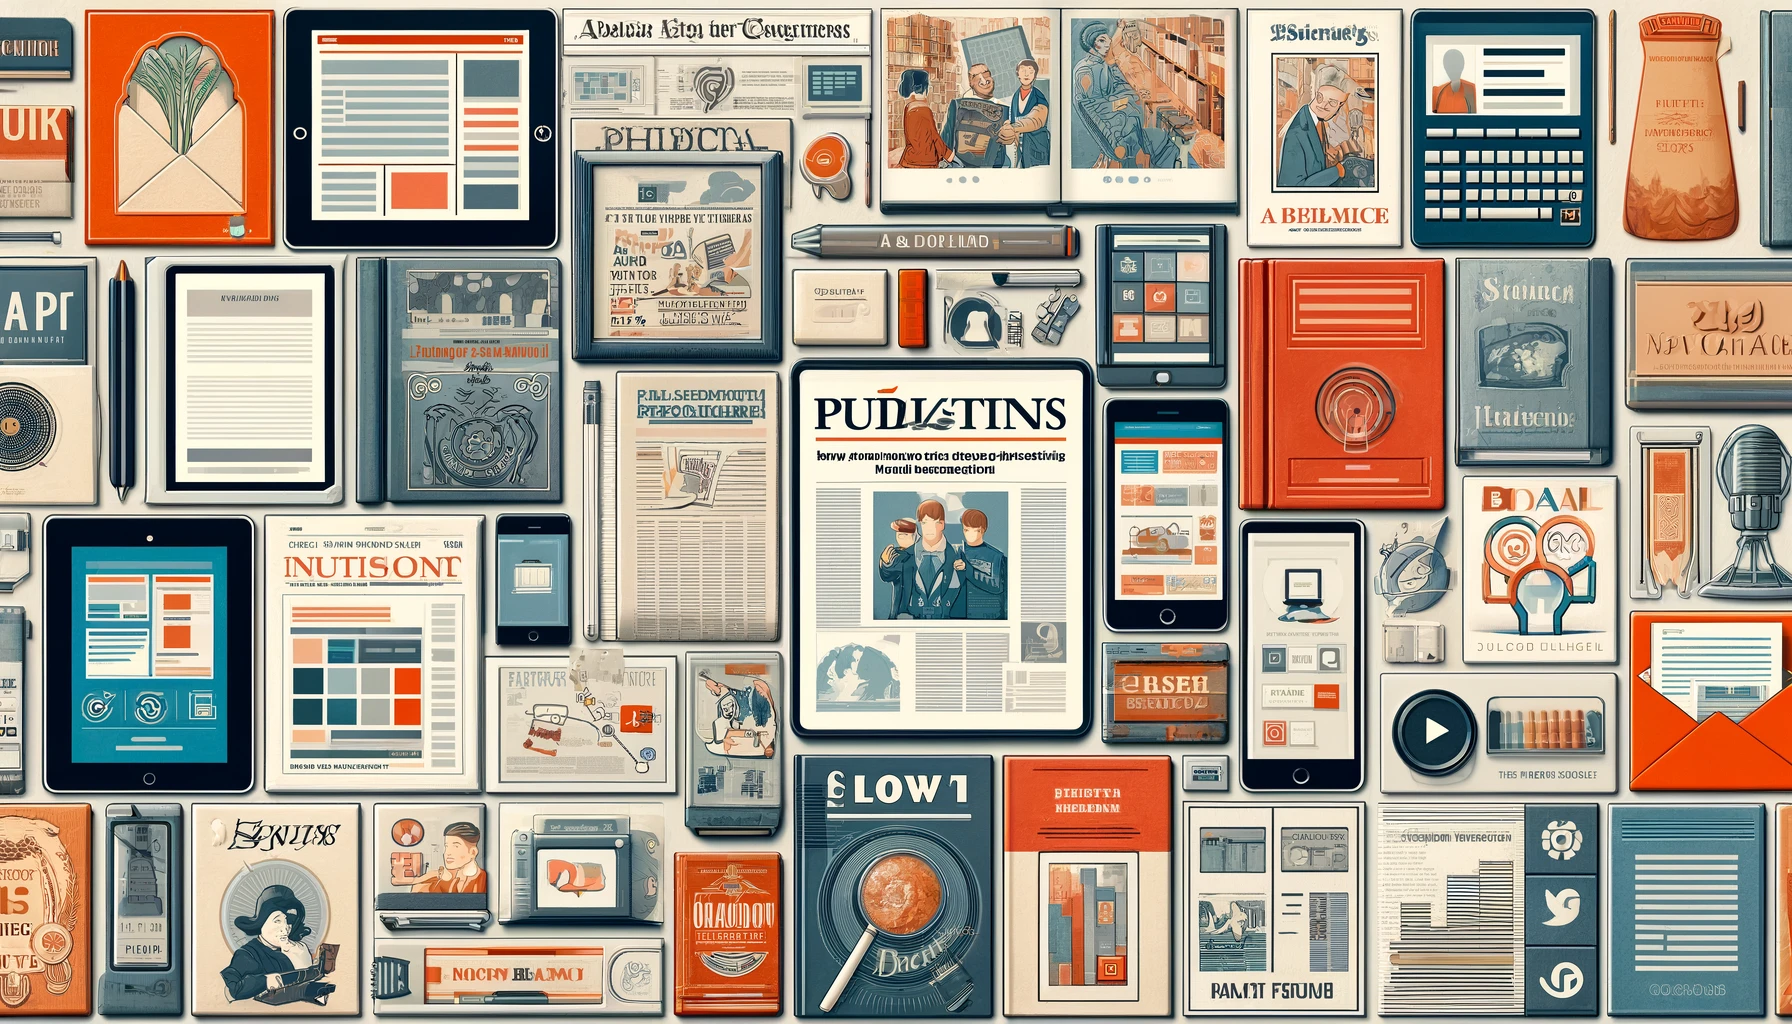 Understanding Different Types of Publications